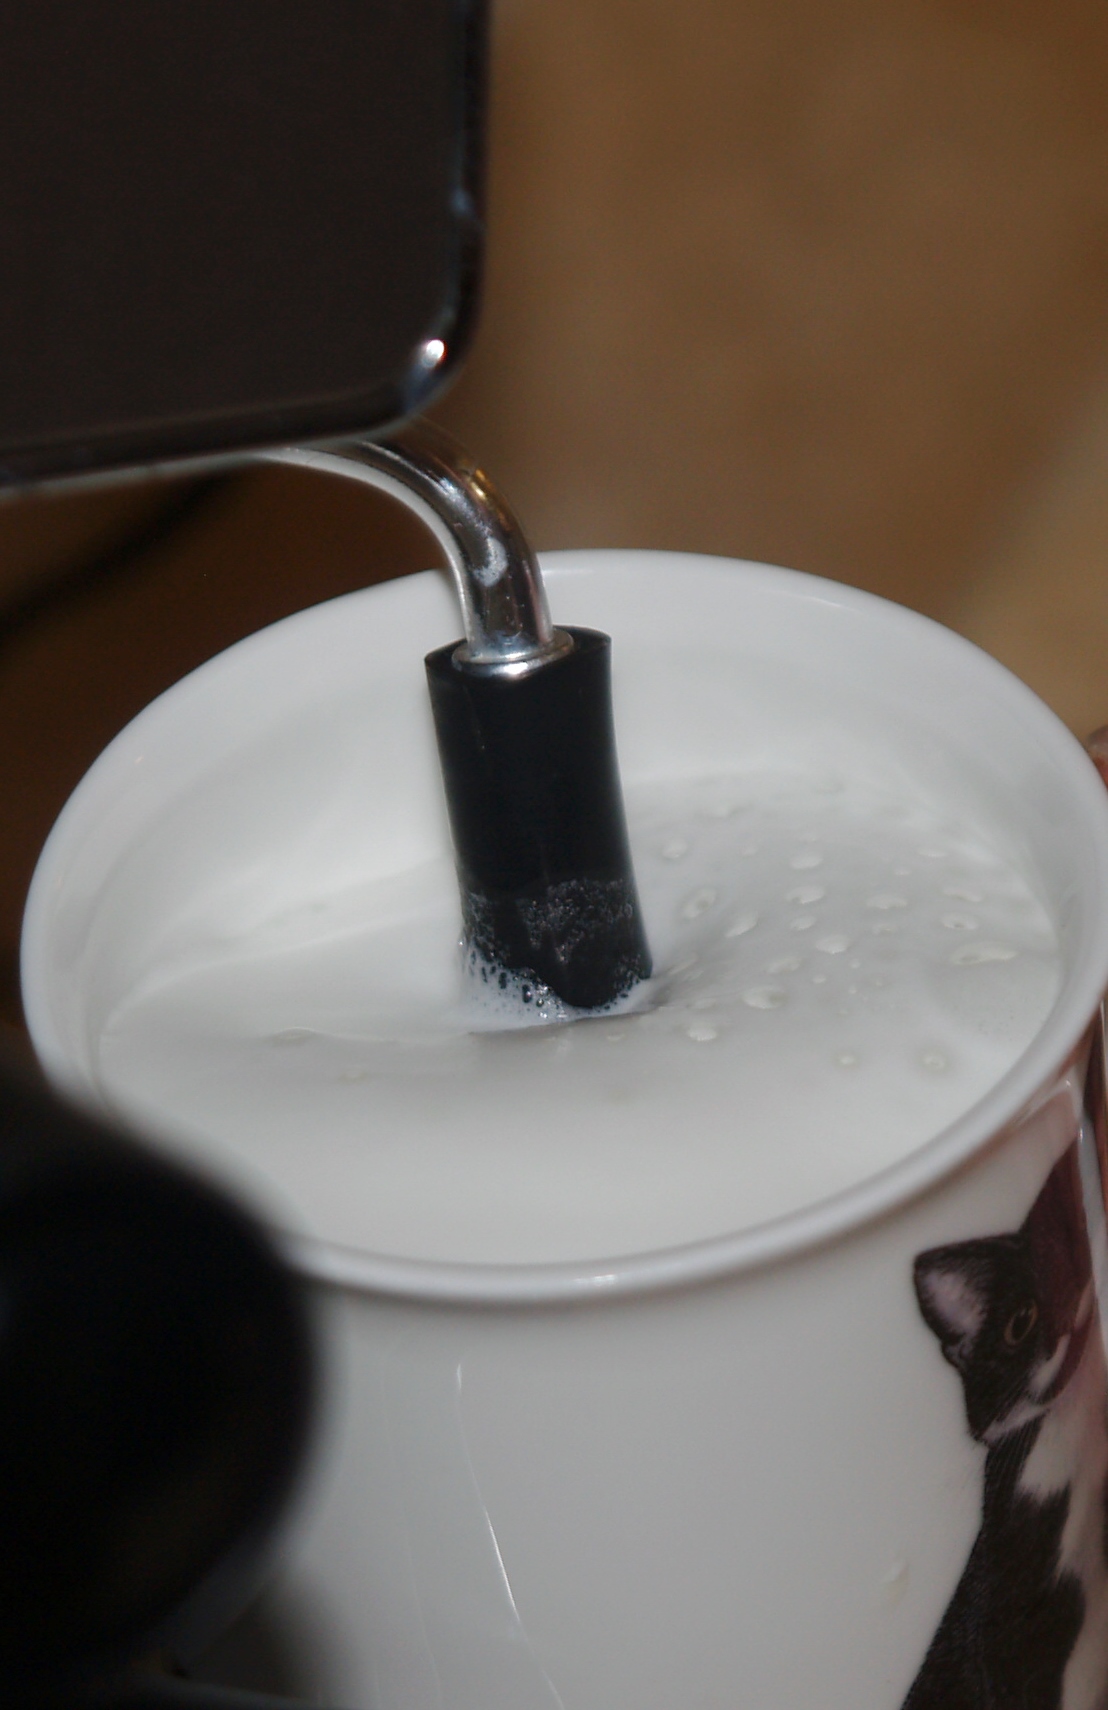 Steaming and Foaming Milk with an Espresso Machine